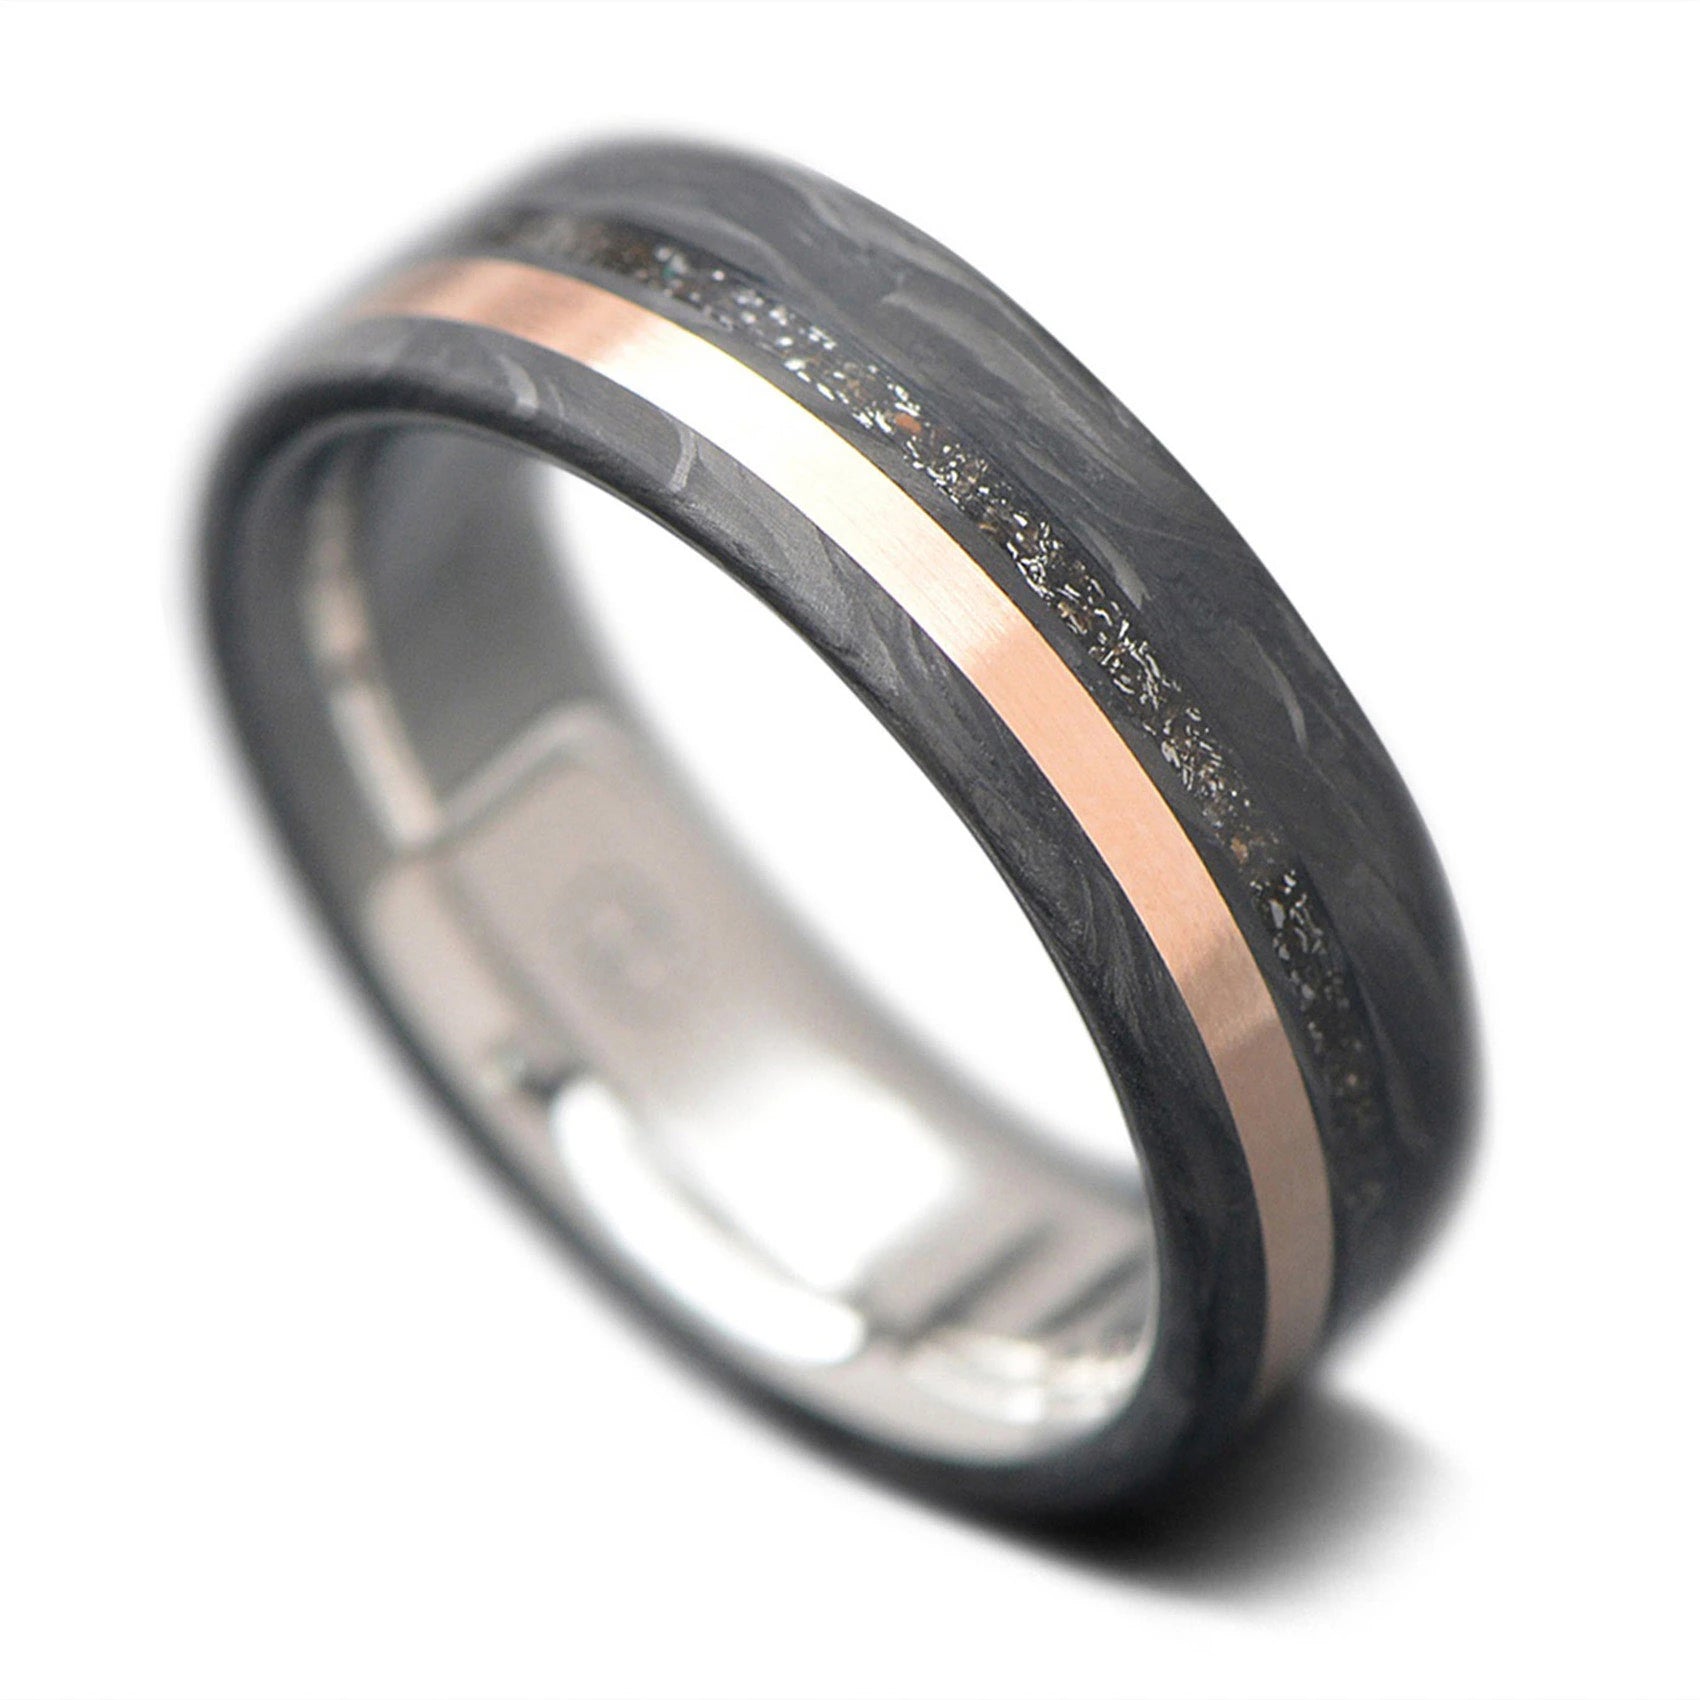 CarbonForged Core Ring with Meteorite, Rose Gold inlay and Titanium inner sleeve, 7mm -THE ODYSSEY